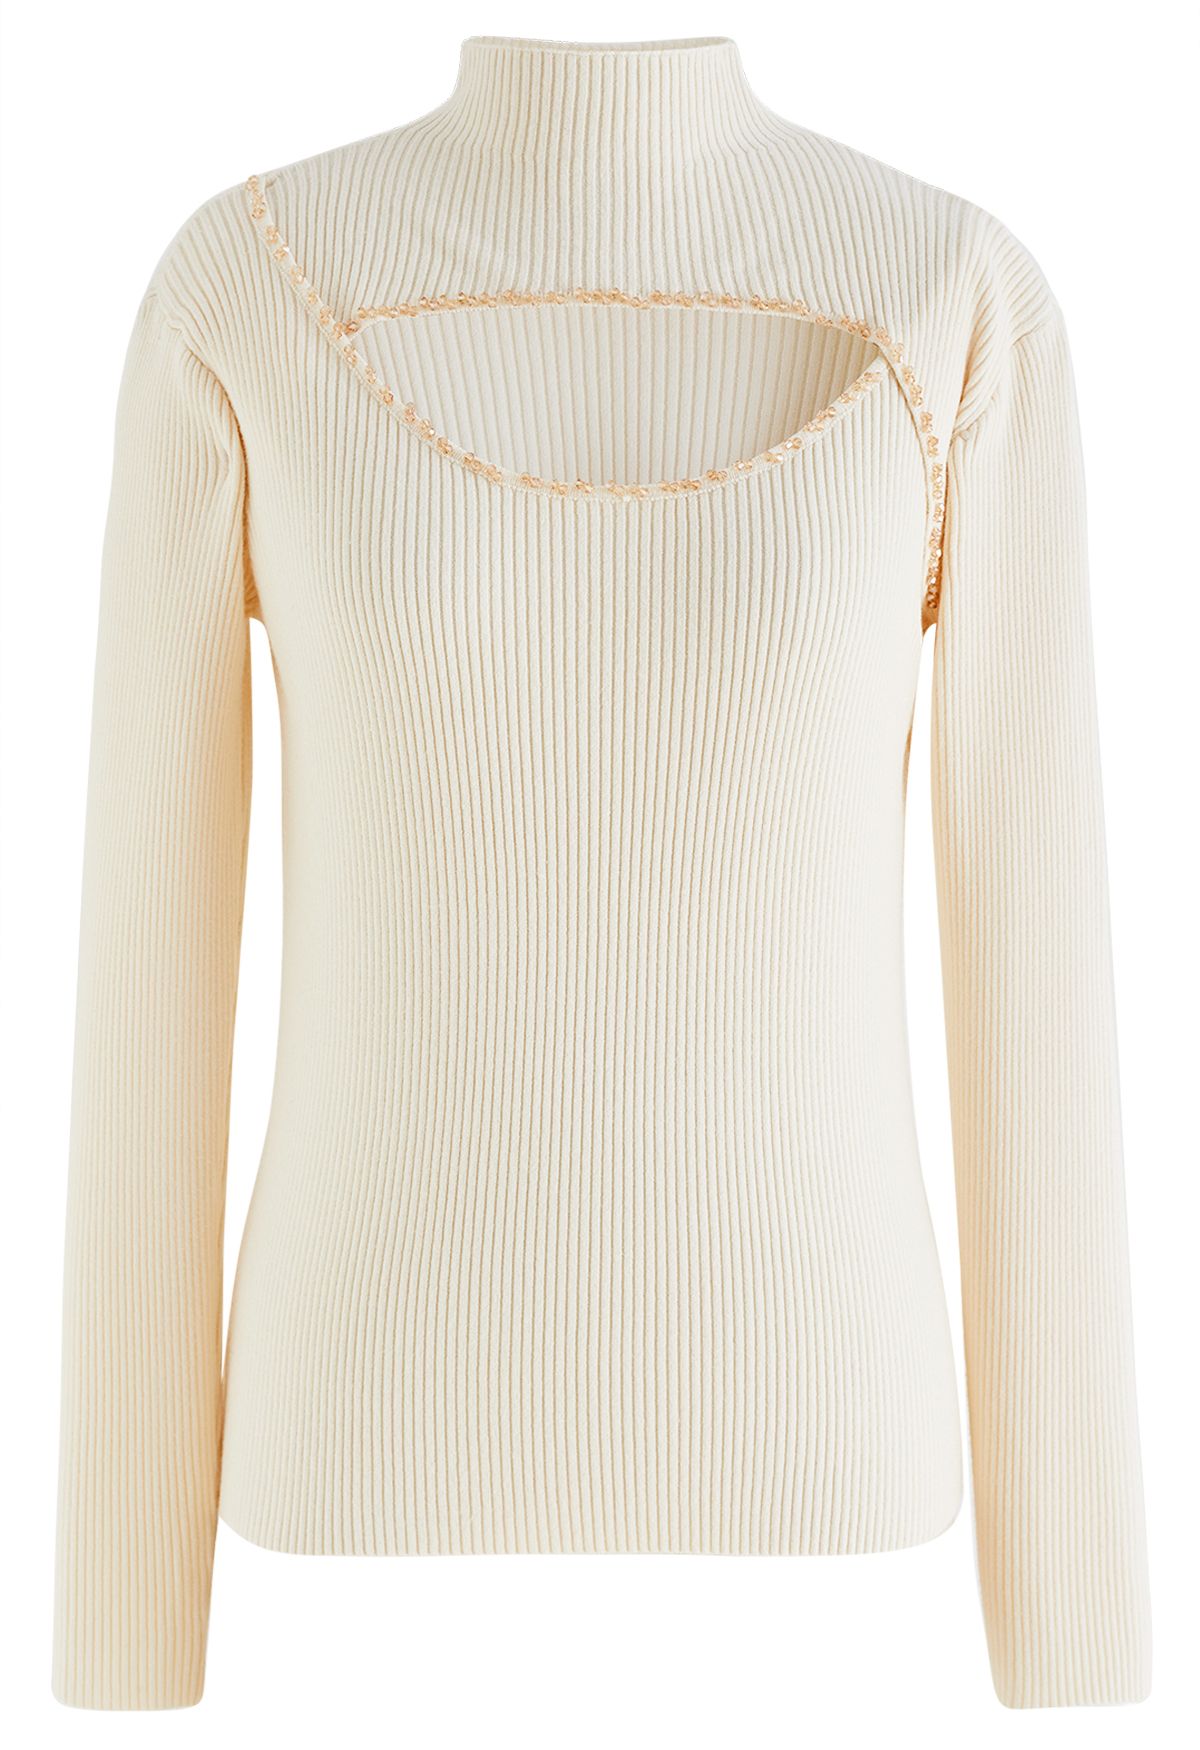 Crystal Trim Cutout High Neck Knit Top in Cream